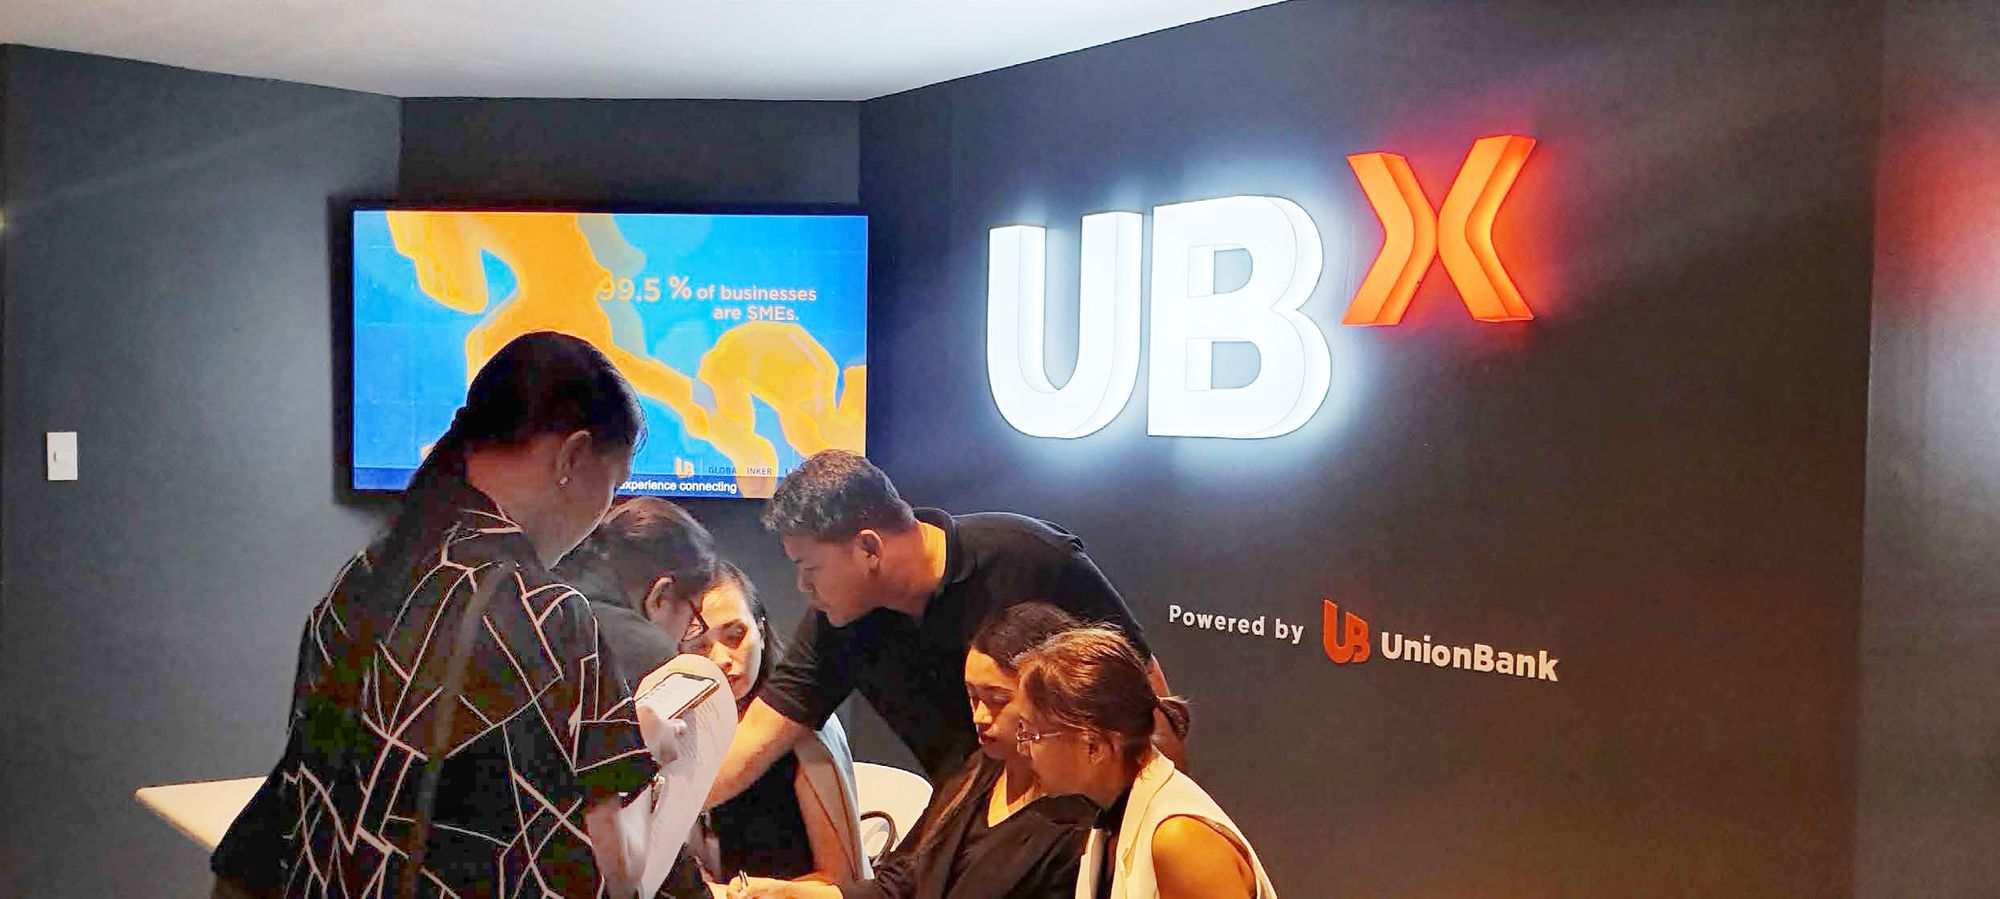 ABC Story: Tech Up Pilipinas! Leveraging UnionBank’s Digital Transformation for social good